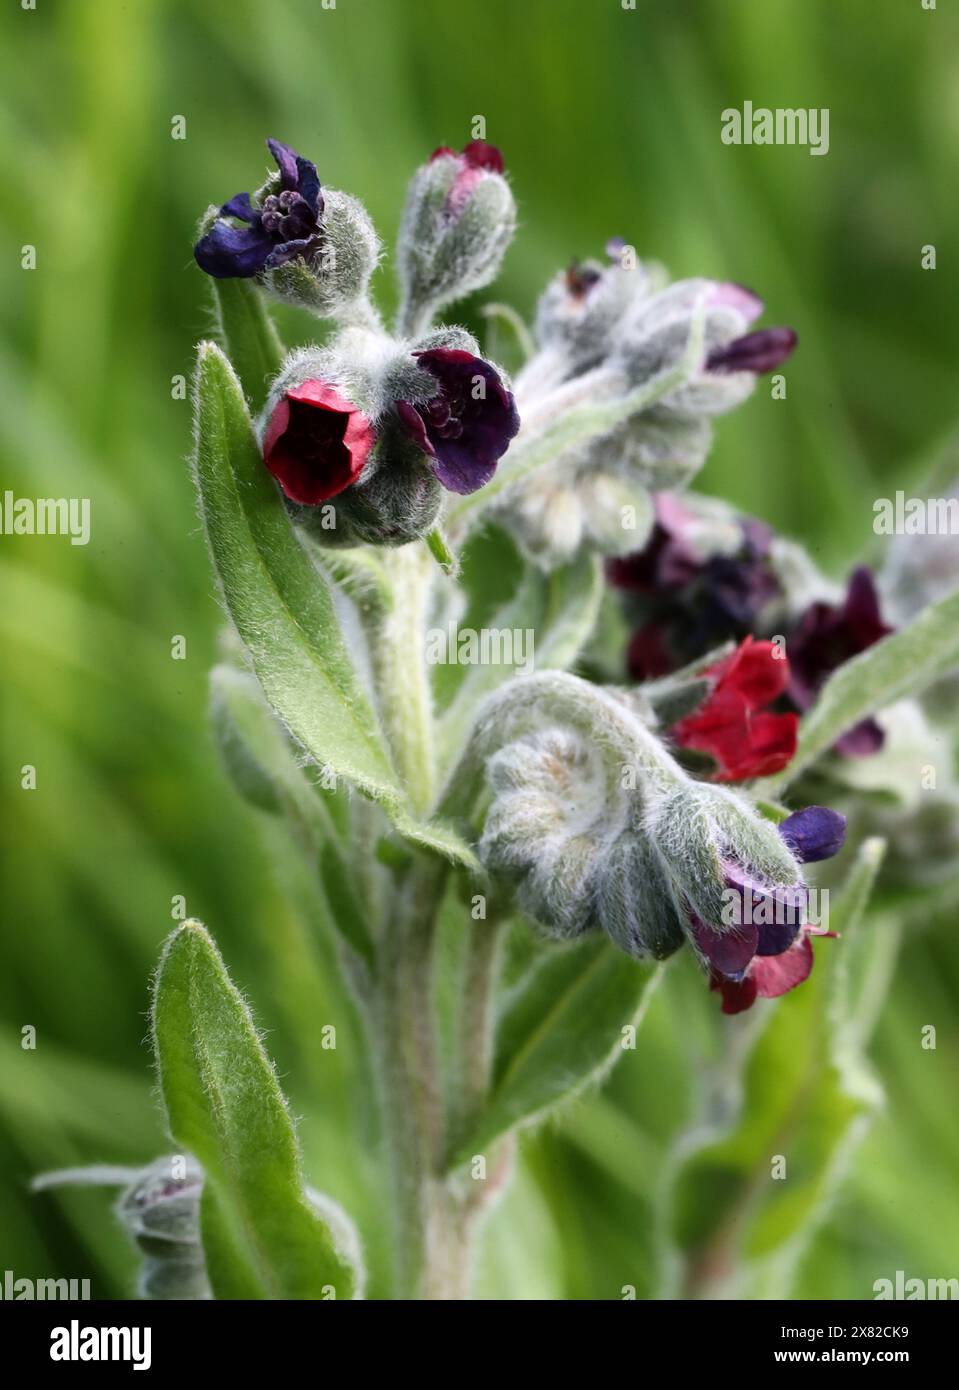 Houndstongue, Cynoglossum officinale, Boraginaceae. Aka houndstooth, dog's tongue, gypsy flower, and rats and mice (due to its smell). Stock Photo